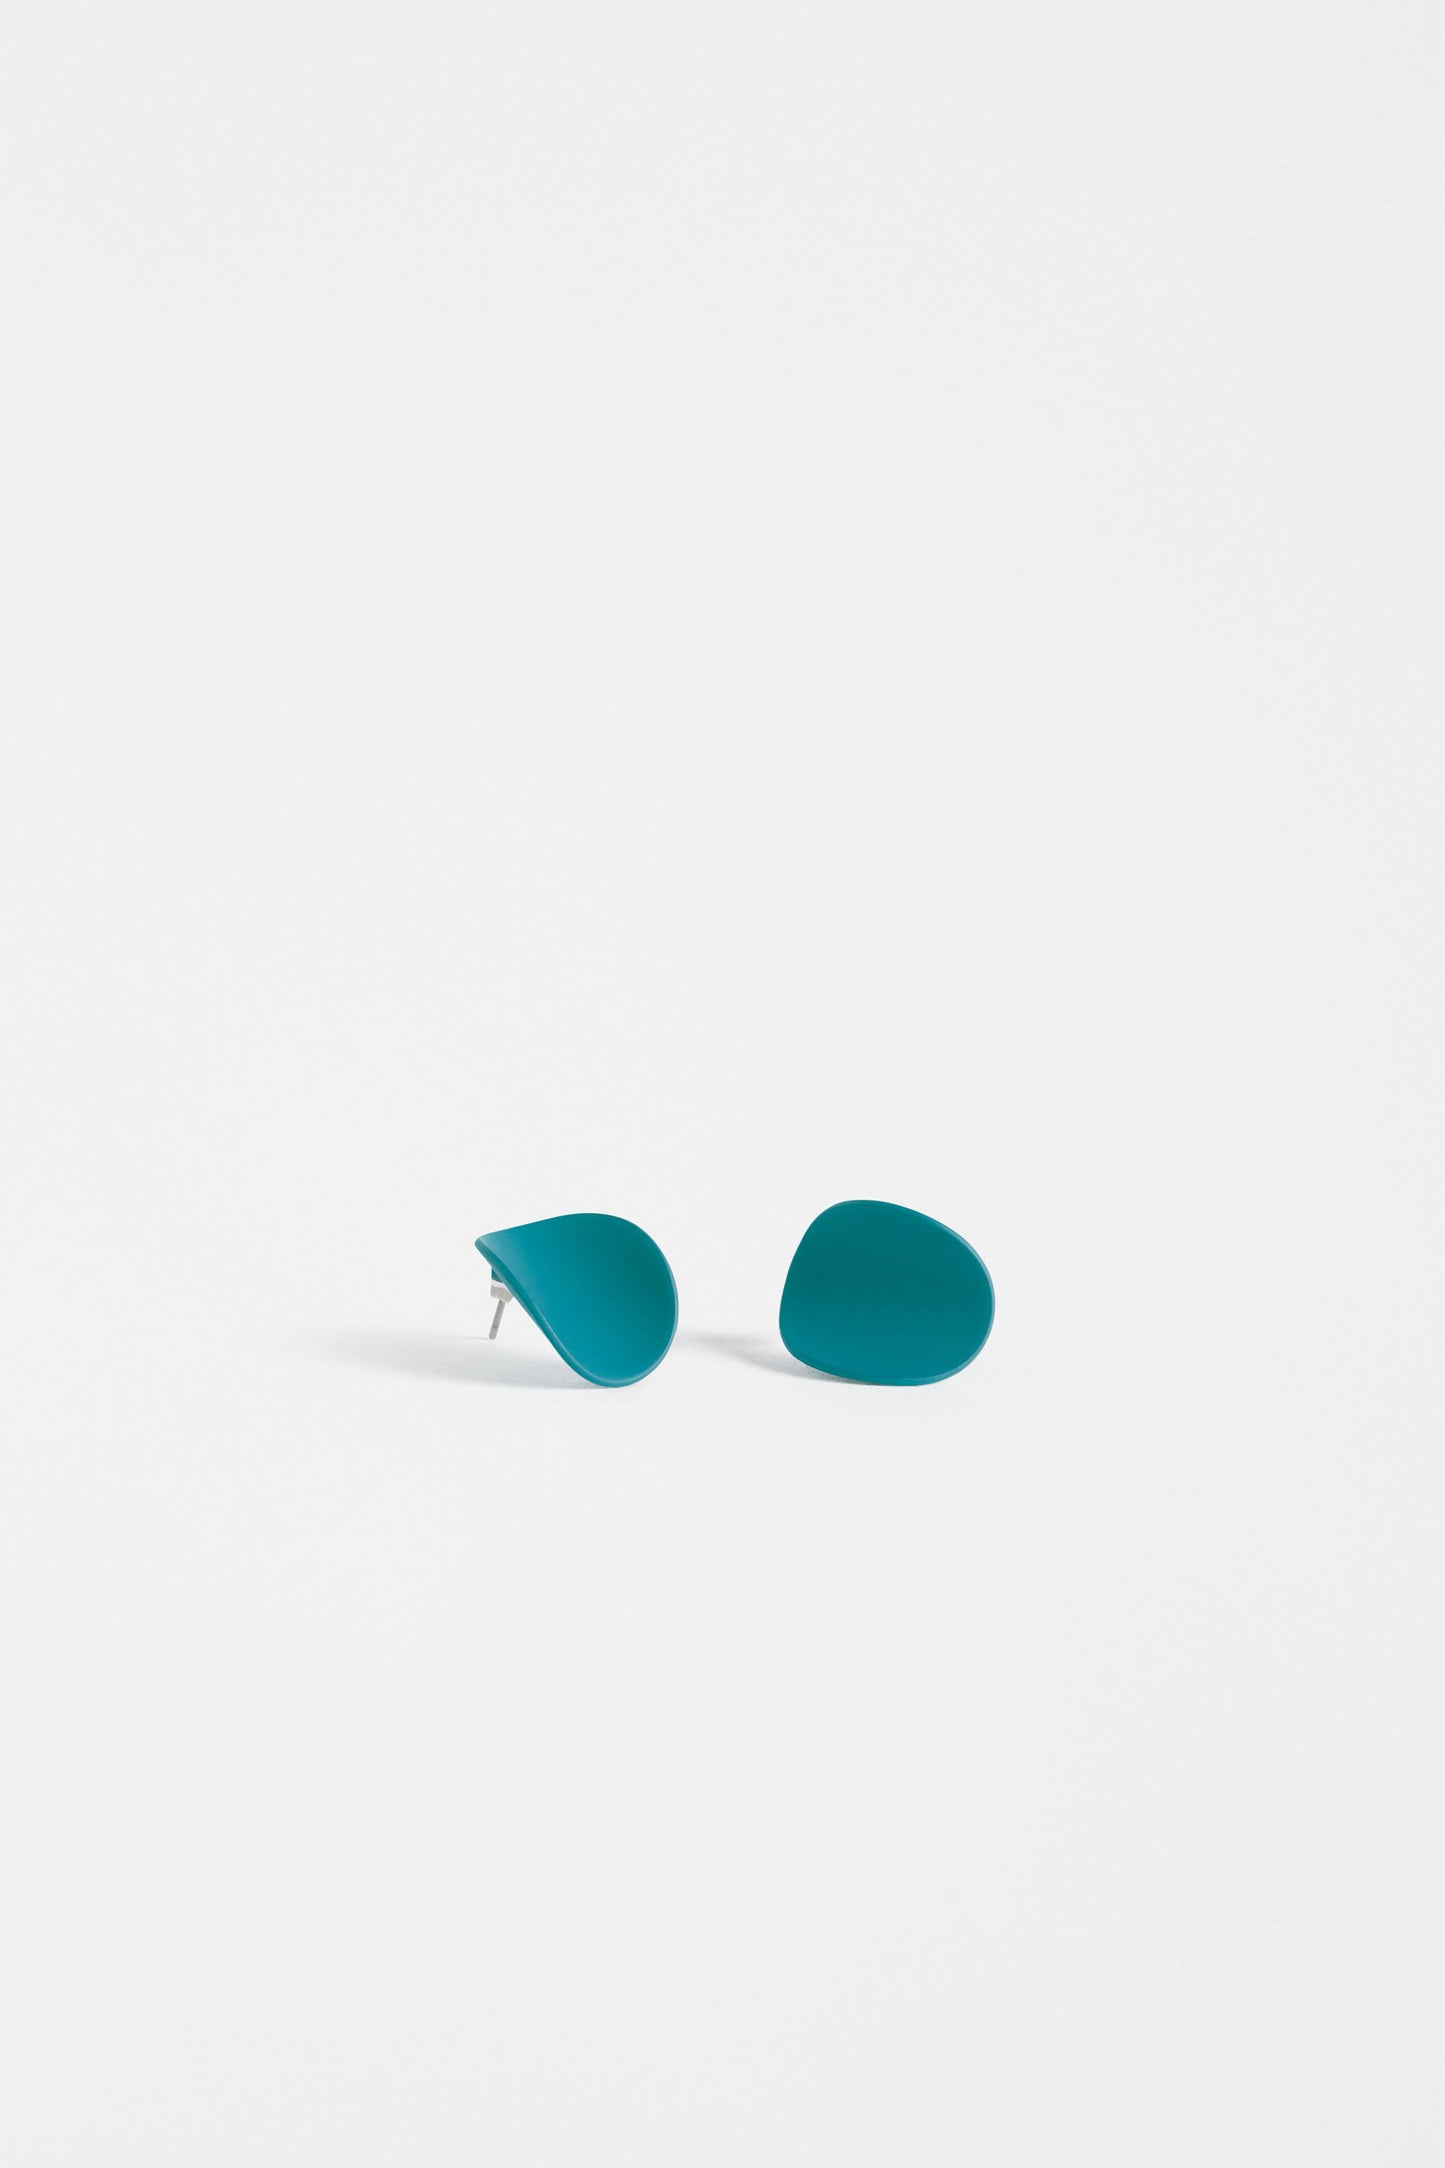 Kave Concave Oval Stud Earring | TEAL